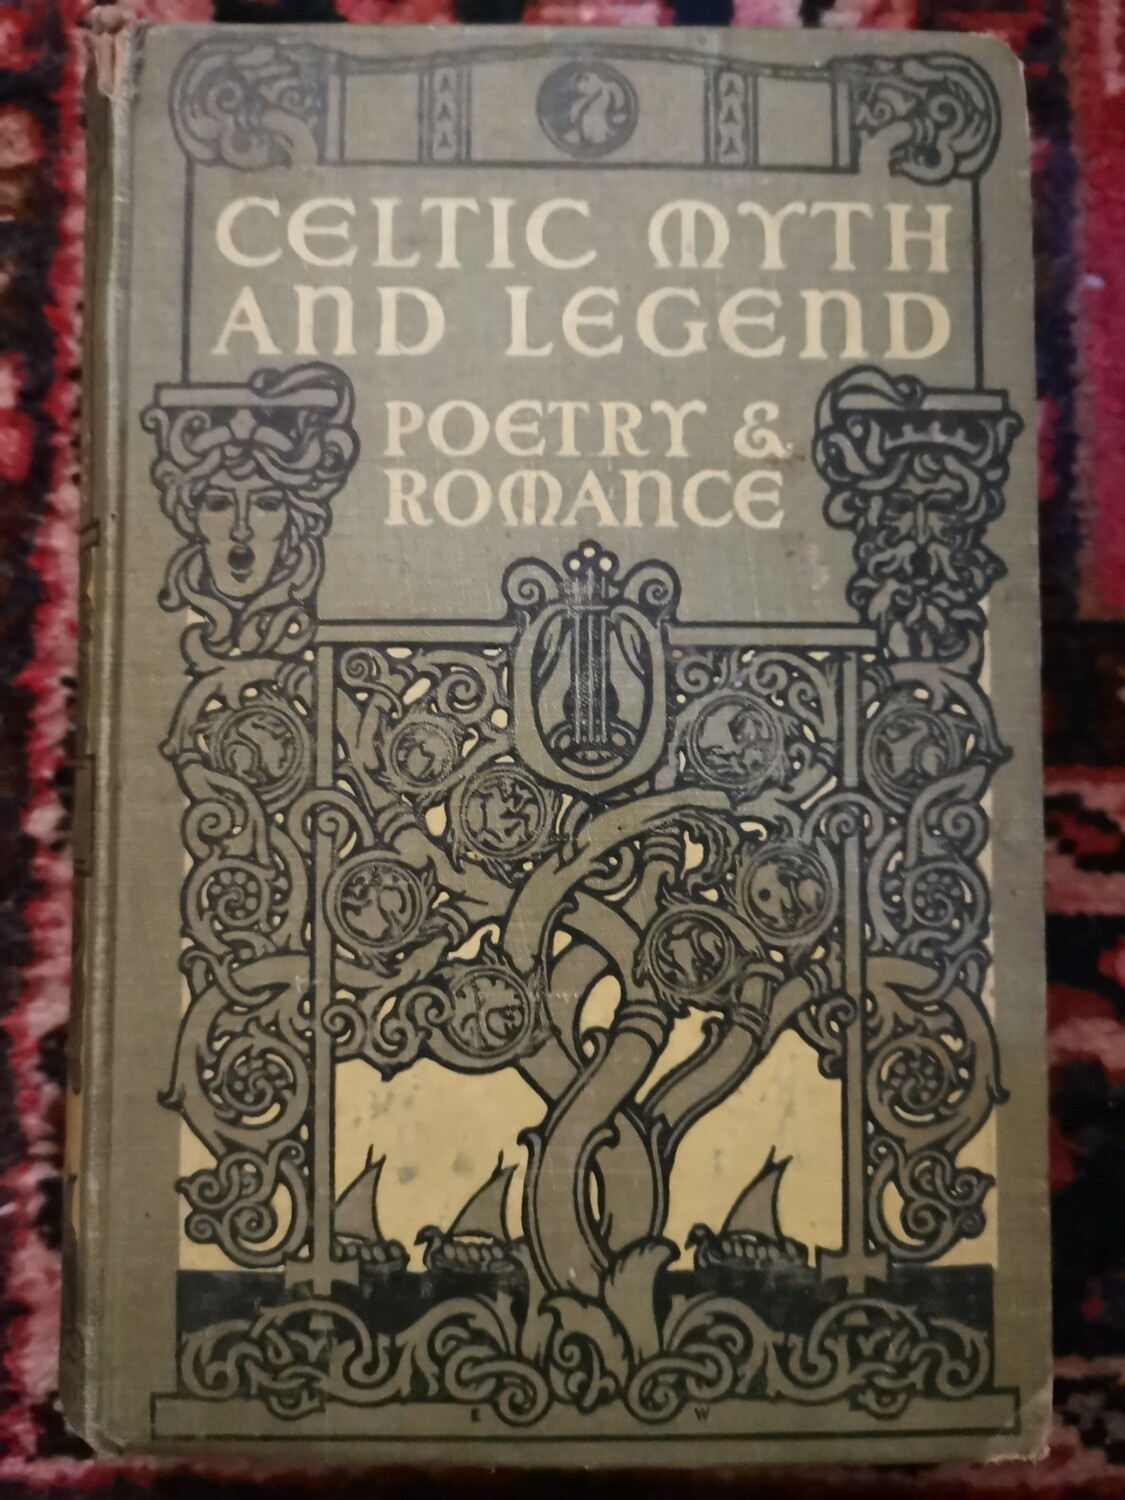 Celtics myth and legend poetry and romance, Charles Squire